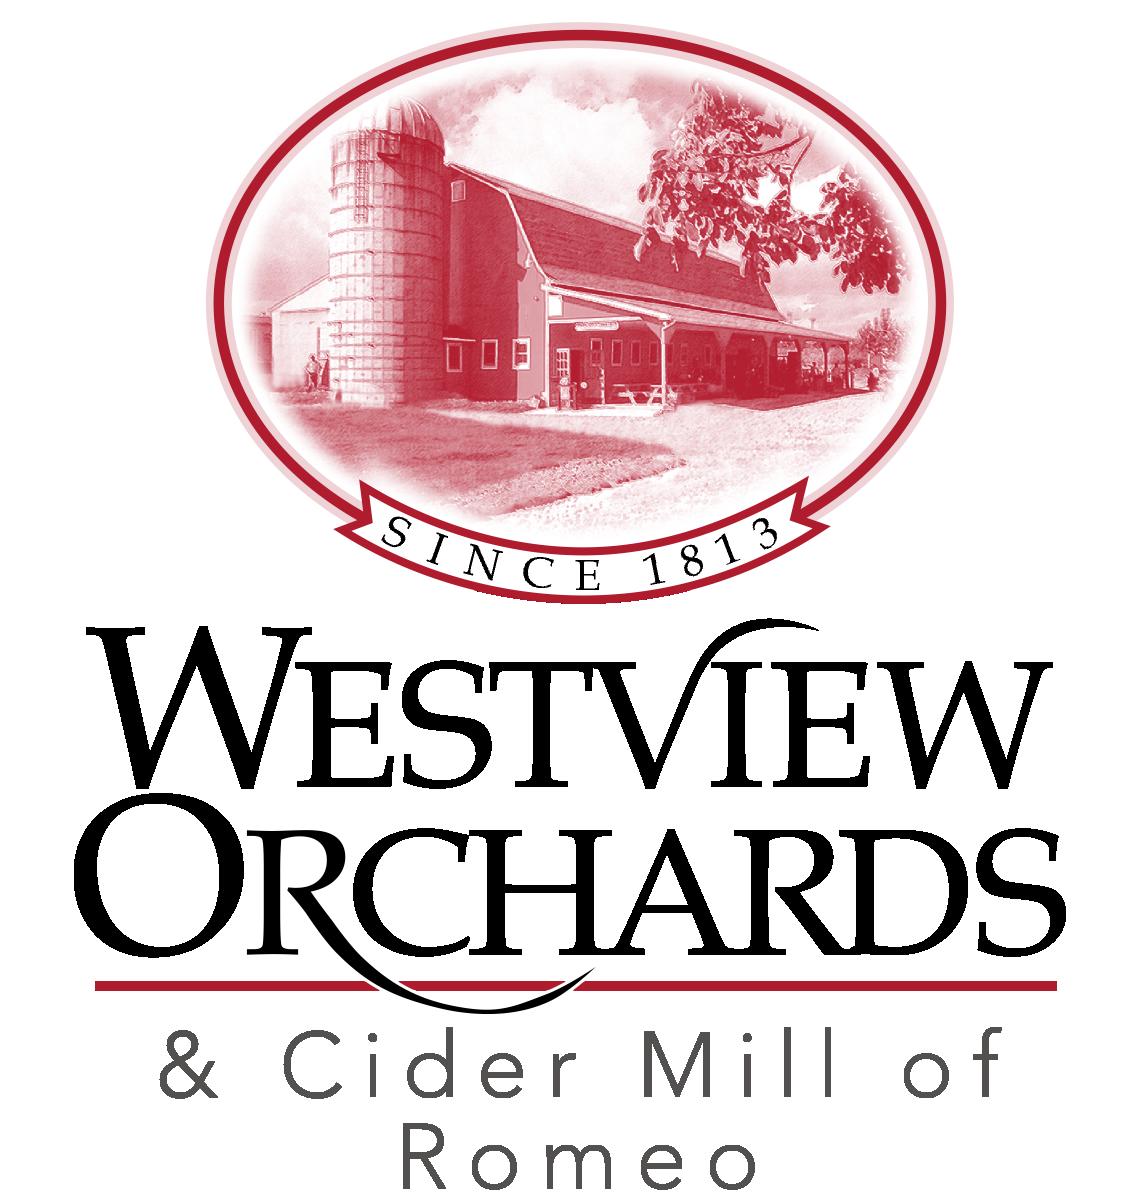 Westview Orchards & Winery